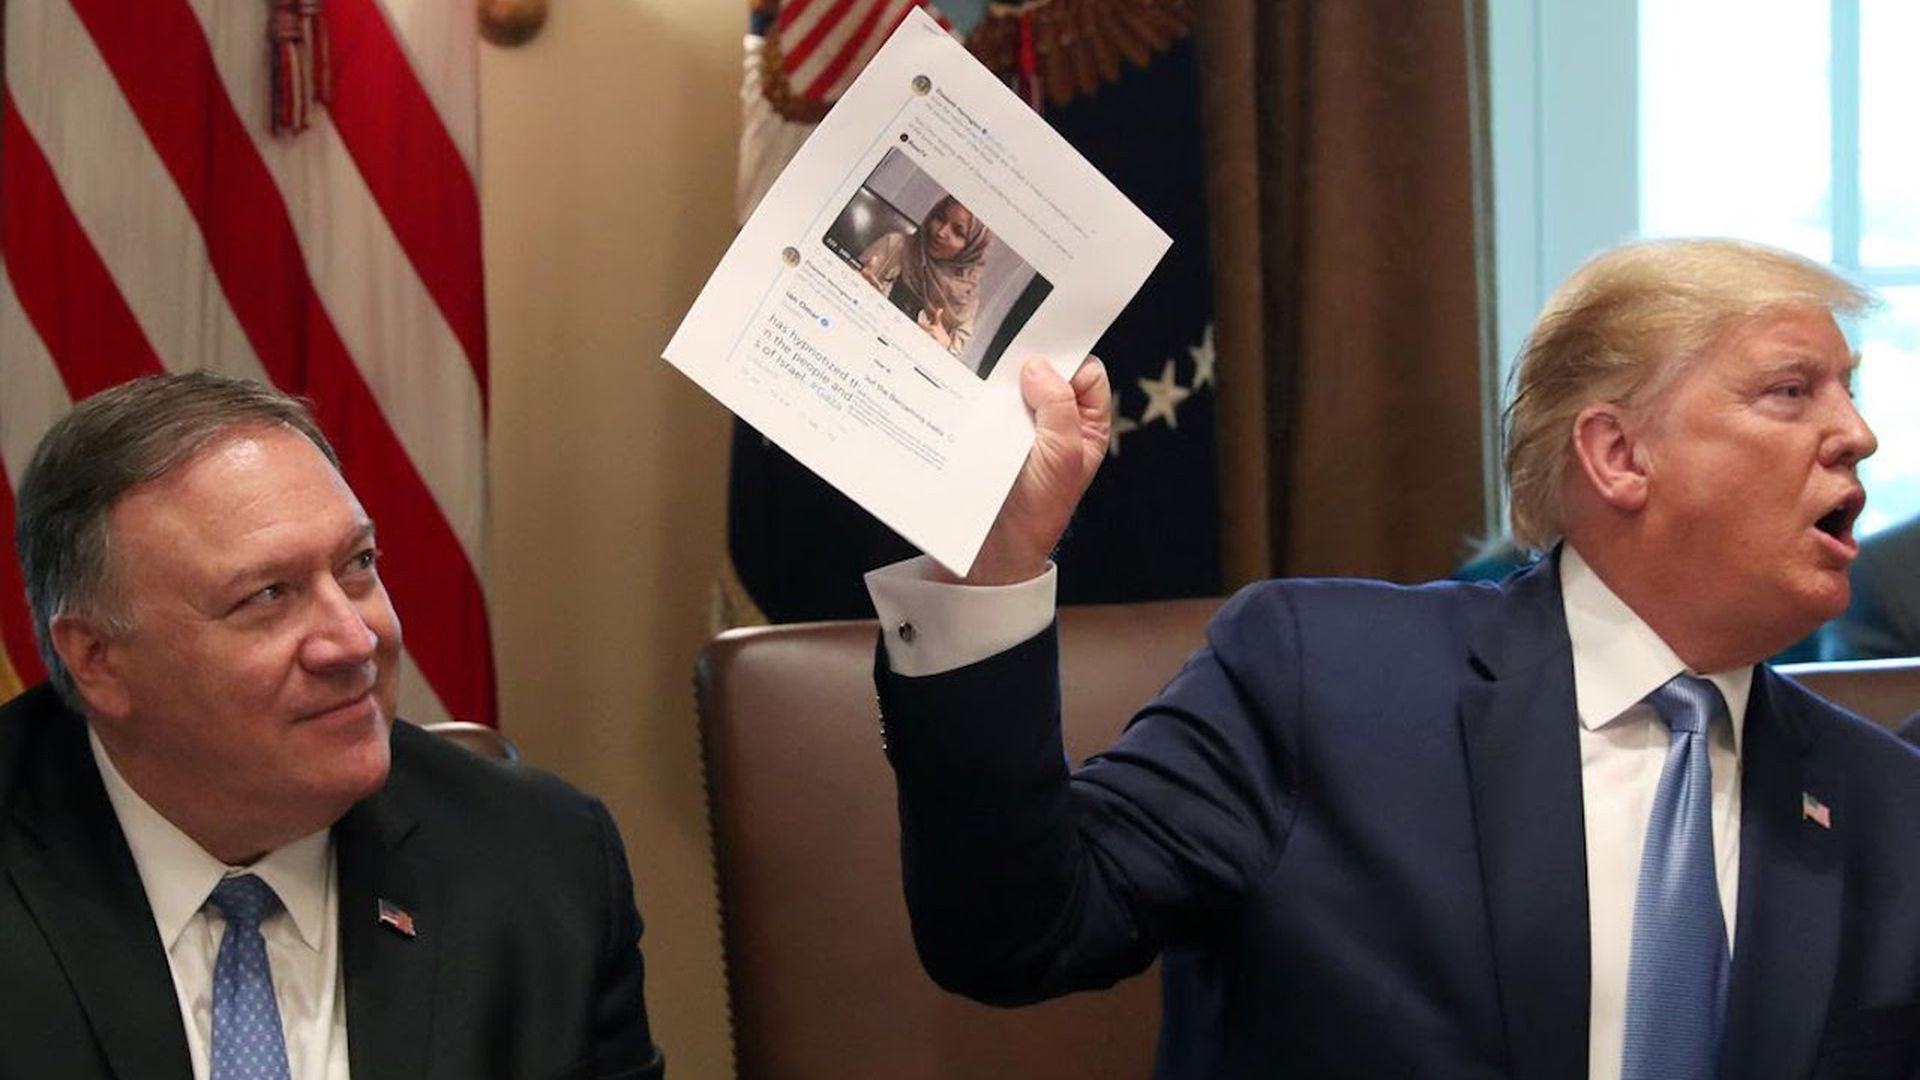 President Trump with Sec. of State Mike Pompeo has he waves around a sheet with Rep. Ilhan Omar's face on it